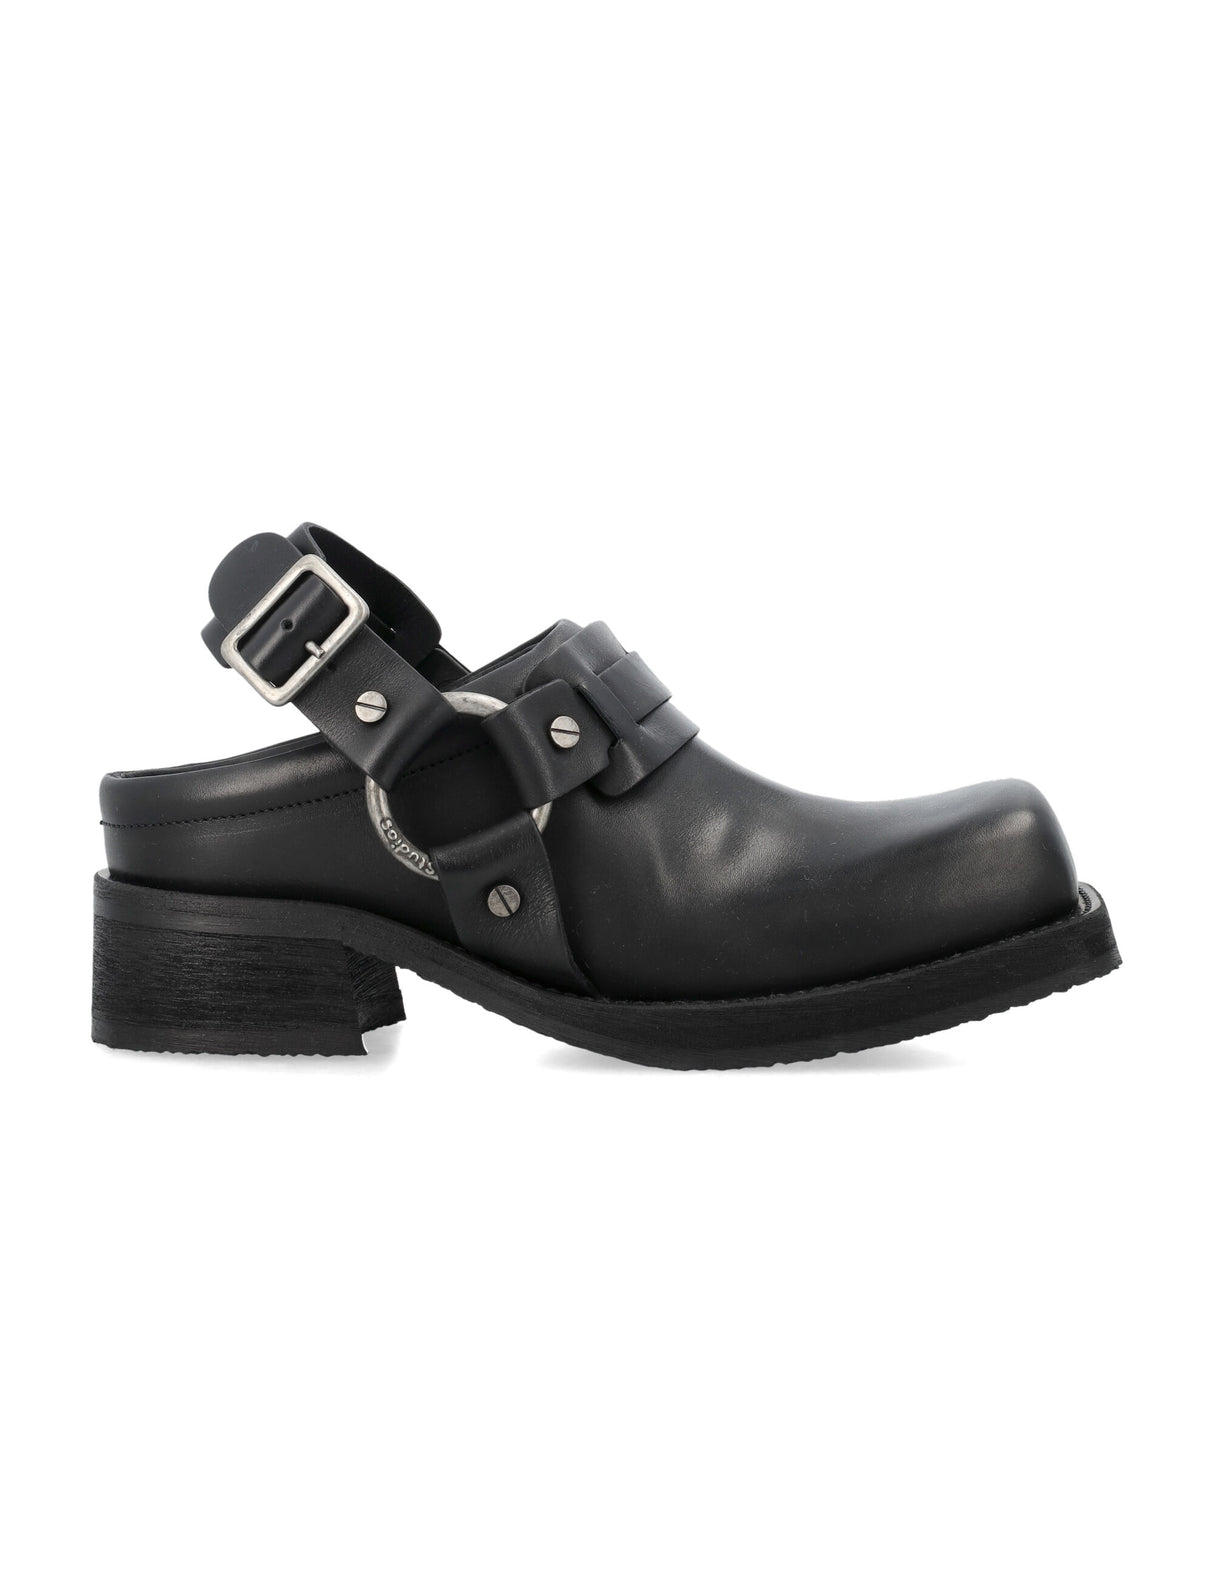 ACNE STUDIOS Square Toe Leather Buckle Flats for Women in Black